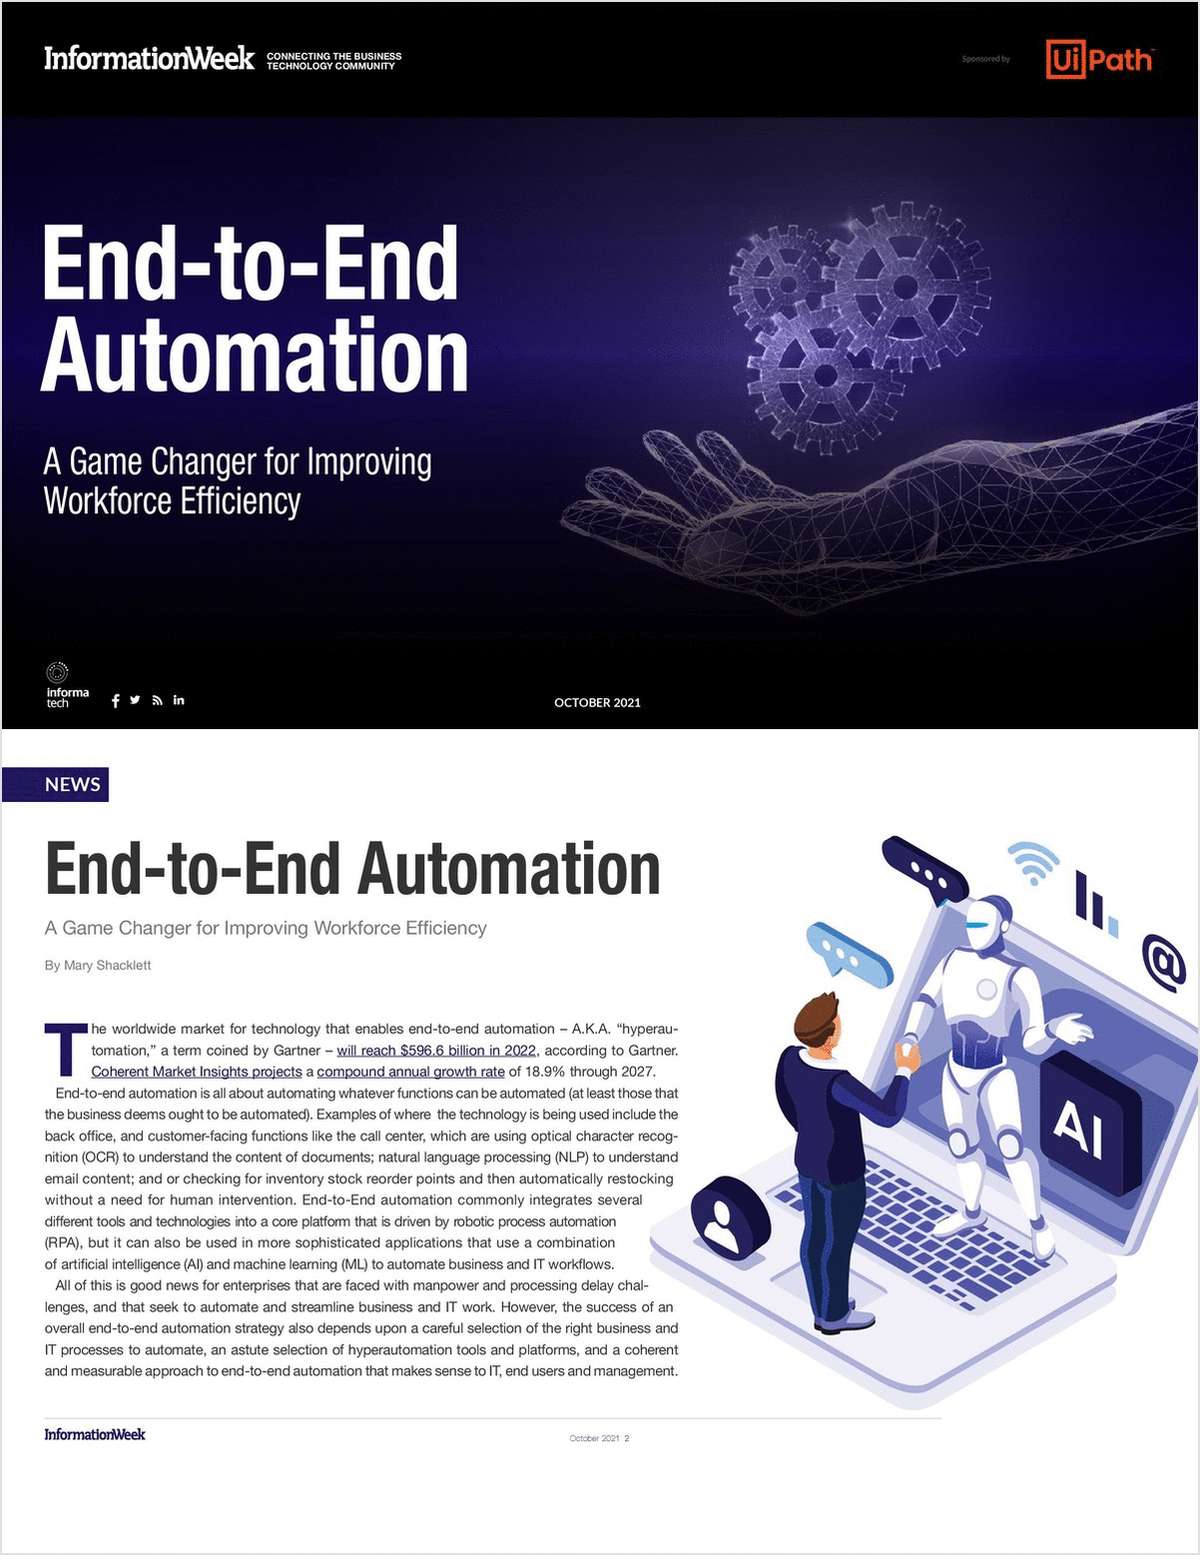 End-to-End Automation: A Game Changer for Improving Workforce Efficiency